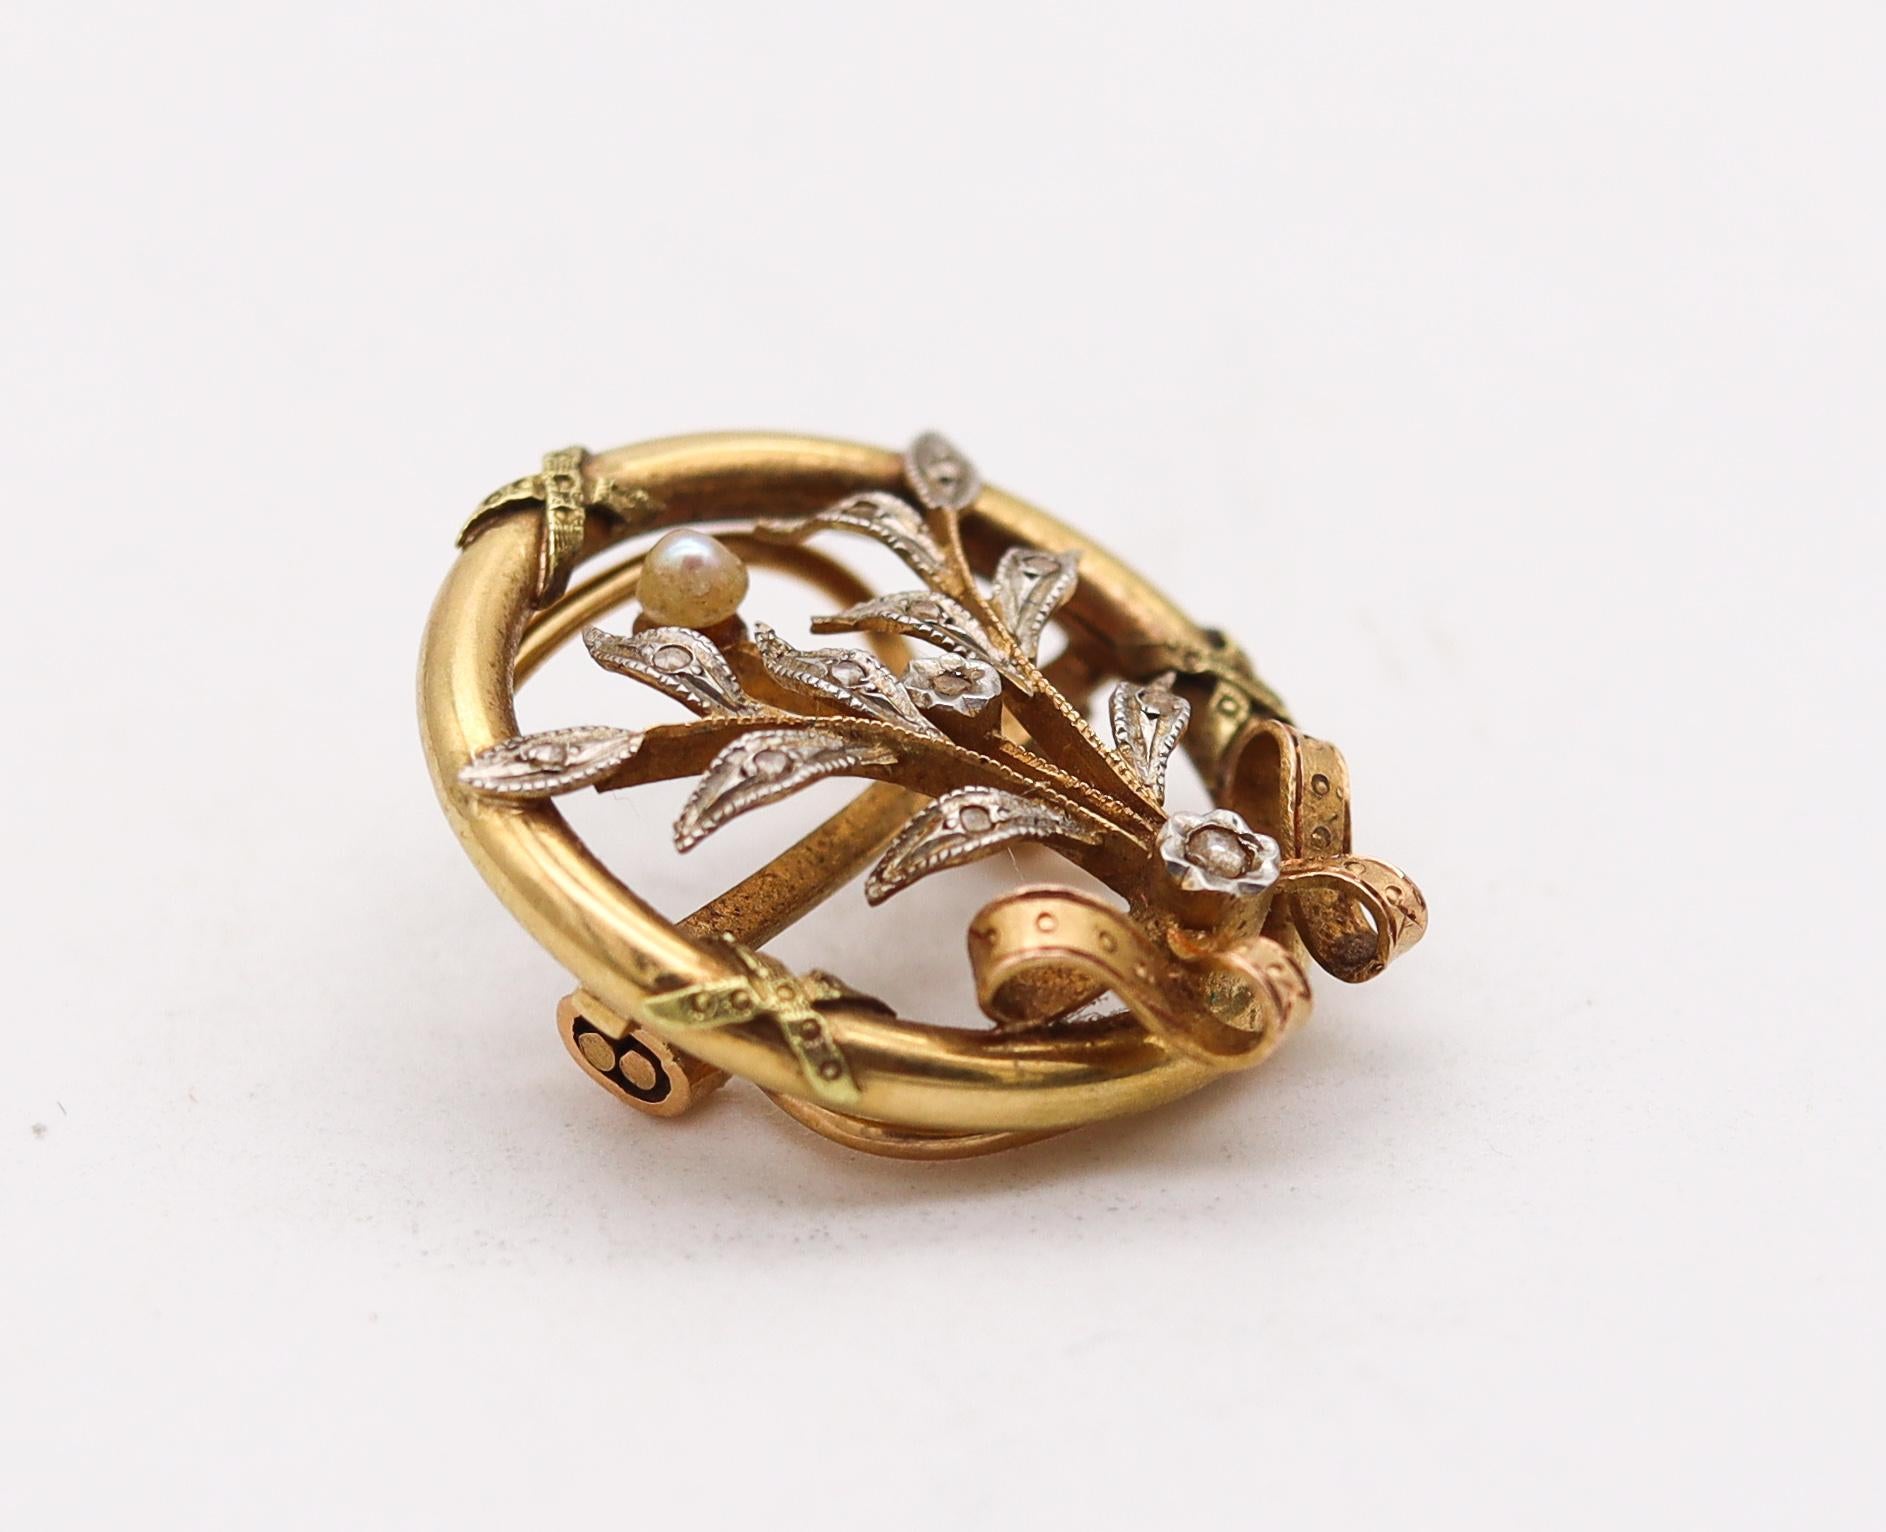 A French necklace joint clip.

Beautiful three-dimensional piece, created in Paris France during the early Edwardian and the Art Nouveau periods, back in the 1900-1910. This beautiful joint-clip brooch has been carefully crafted with flowers motifs